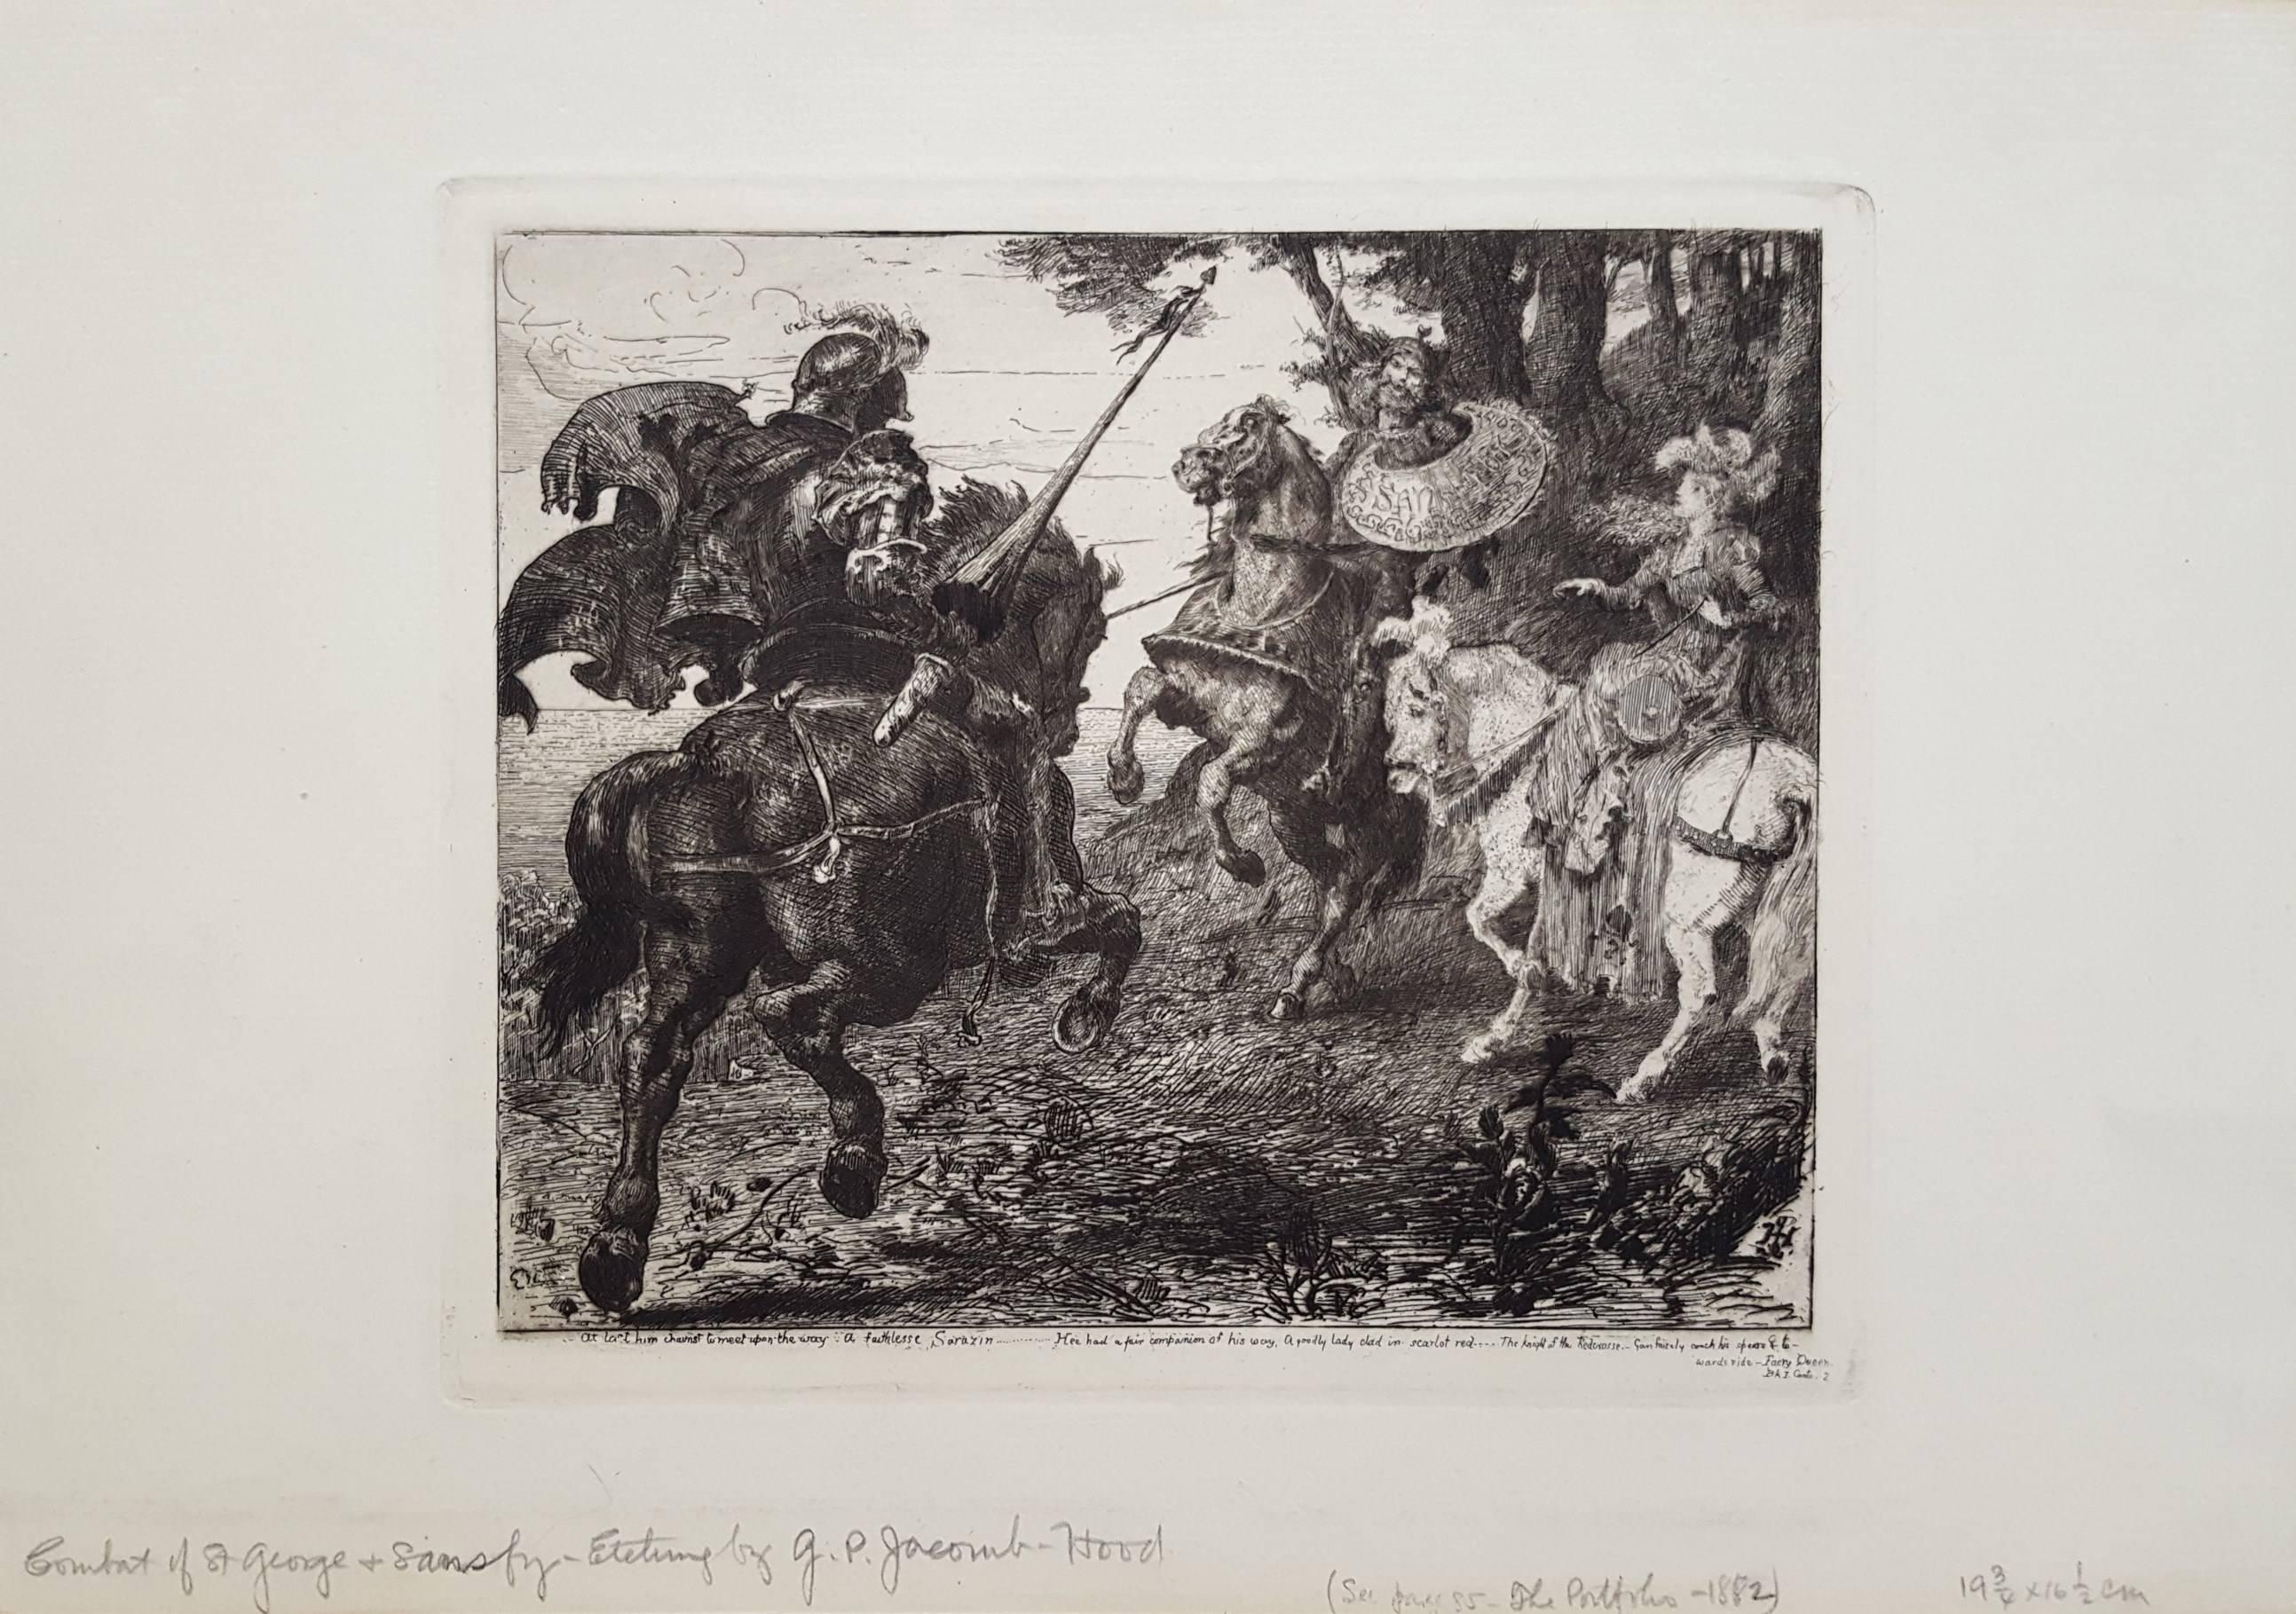 Combat of St. George and Sansfoy - Print by George Percy Jacomb-Hood